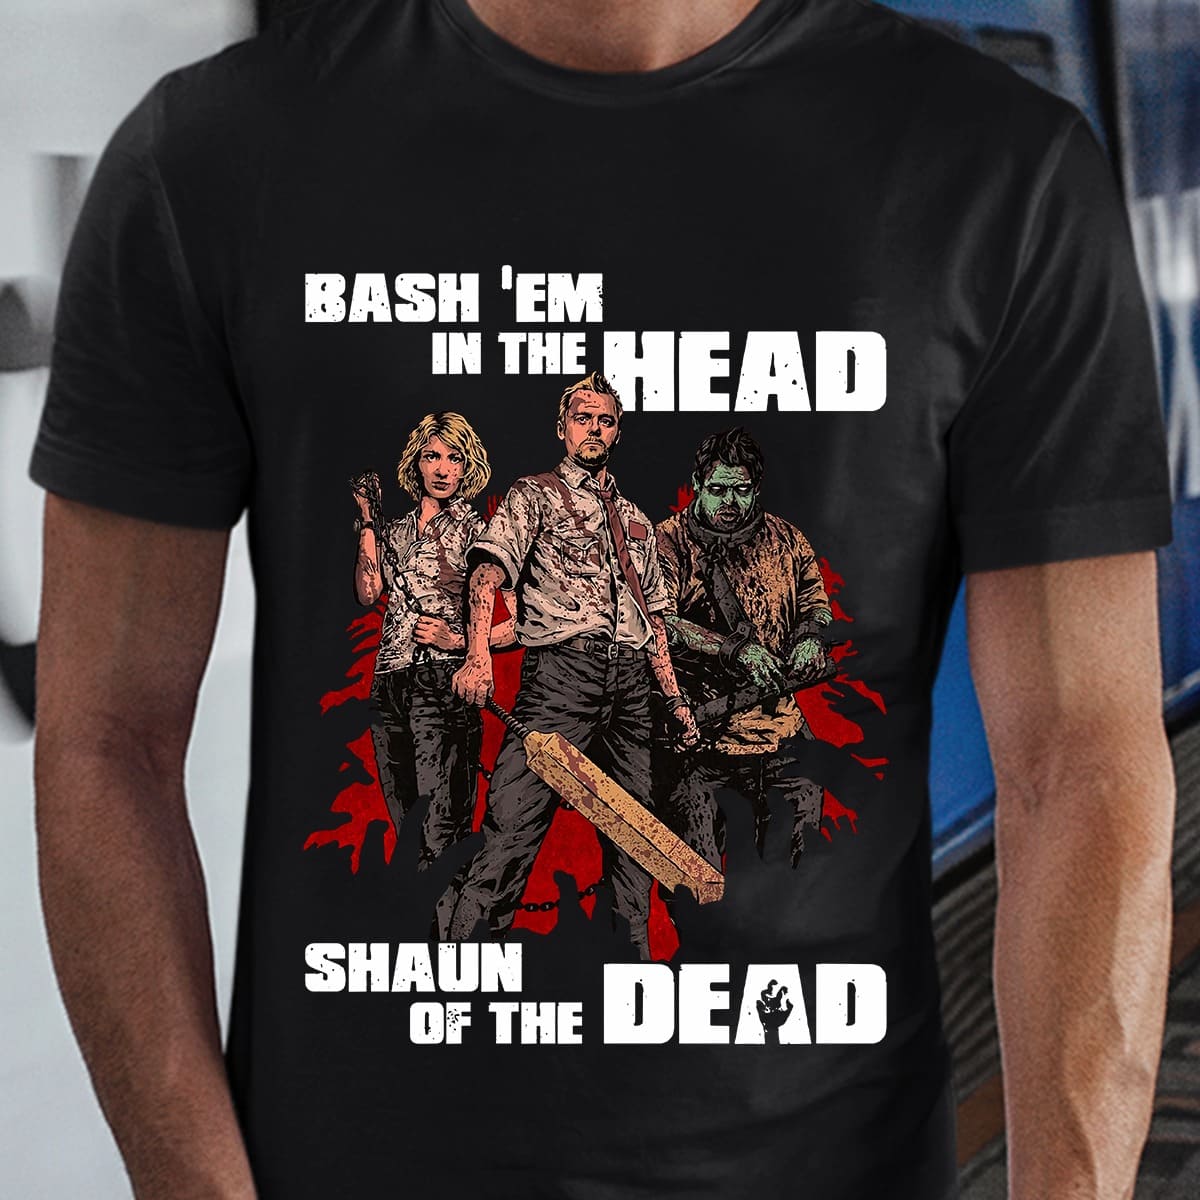 Bash 'em in the head shaun of the dead - Shaun of the Dead Movie Character